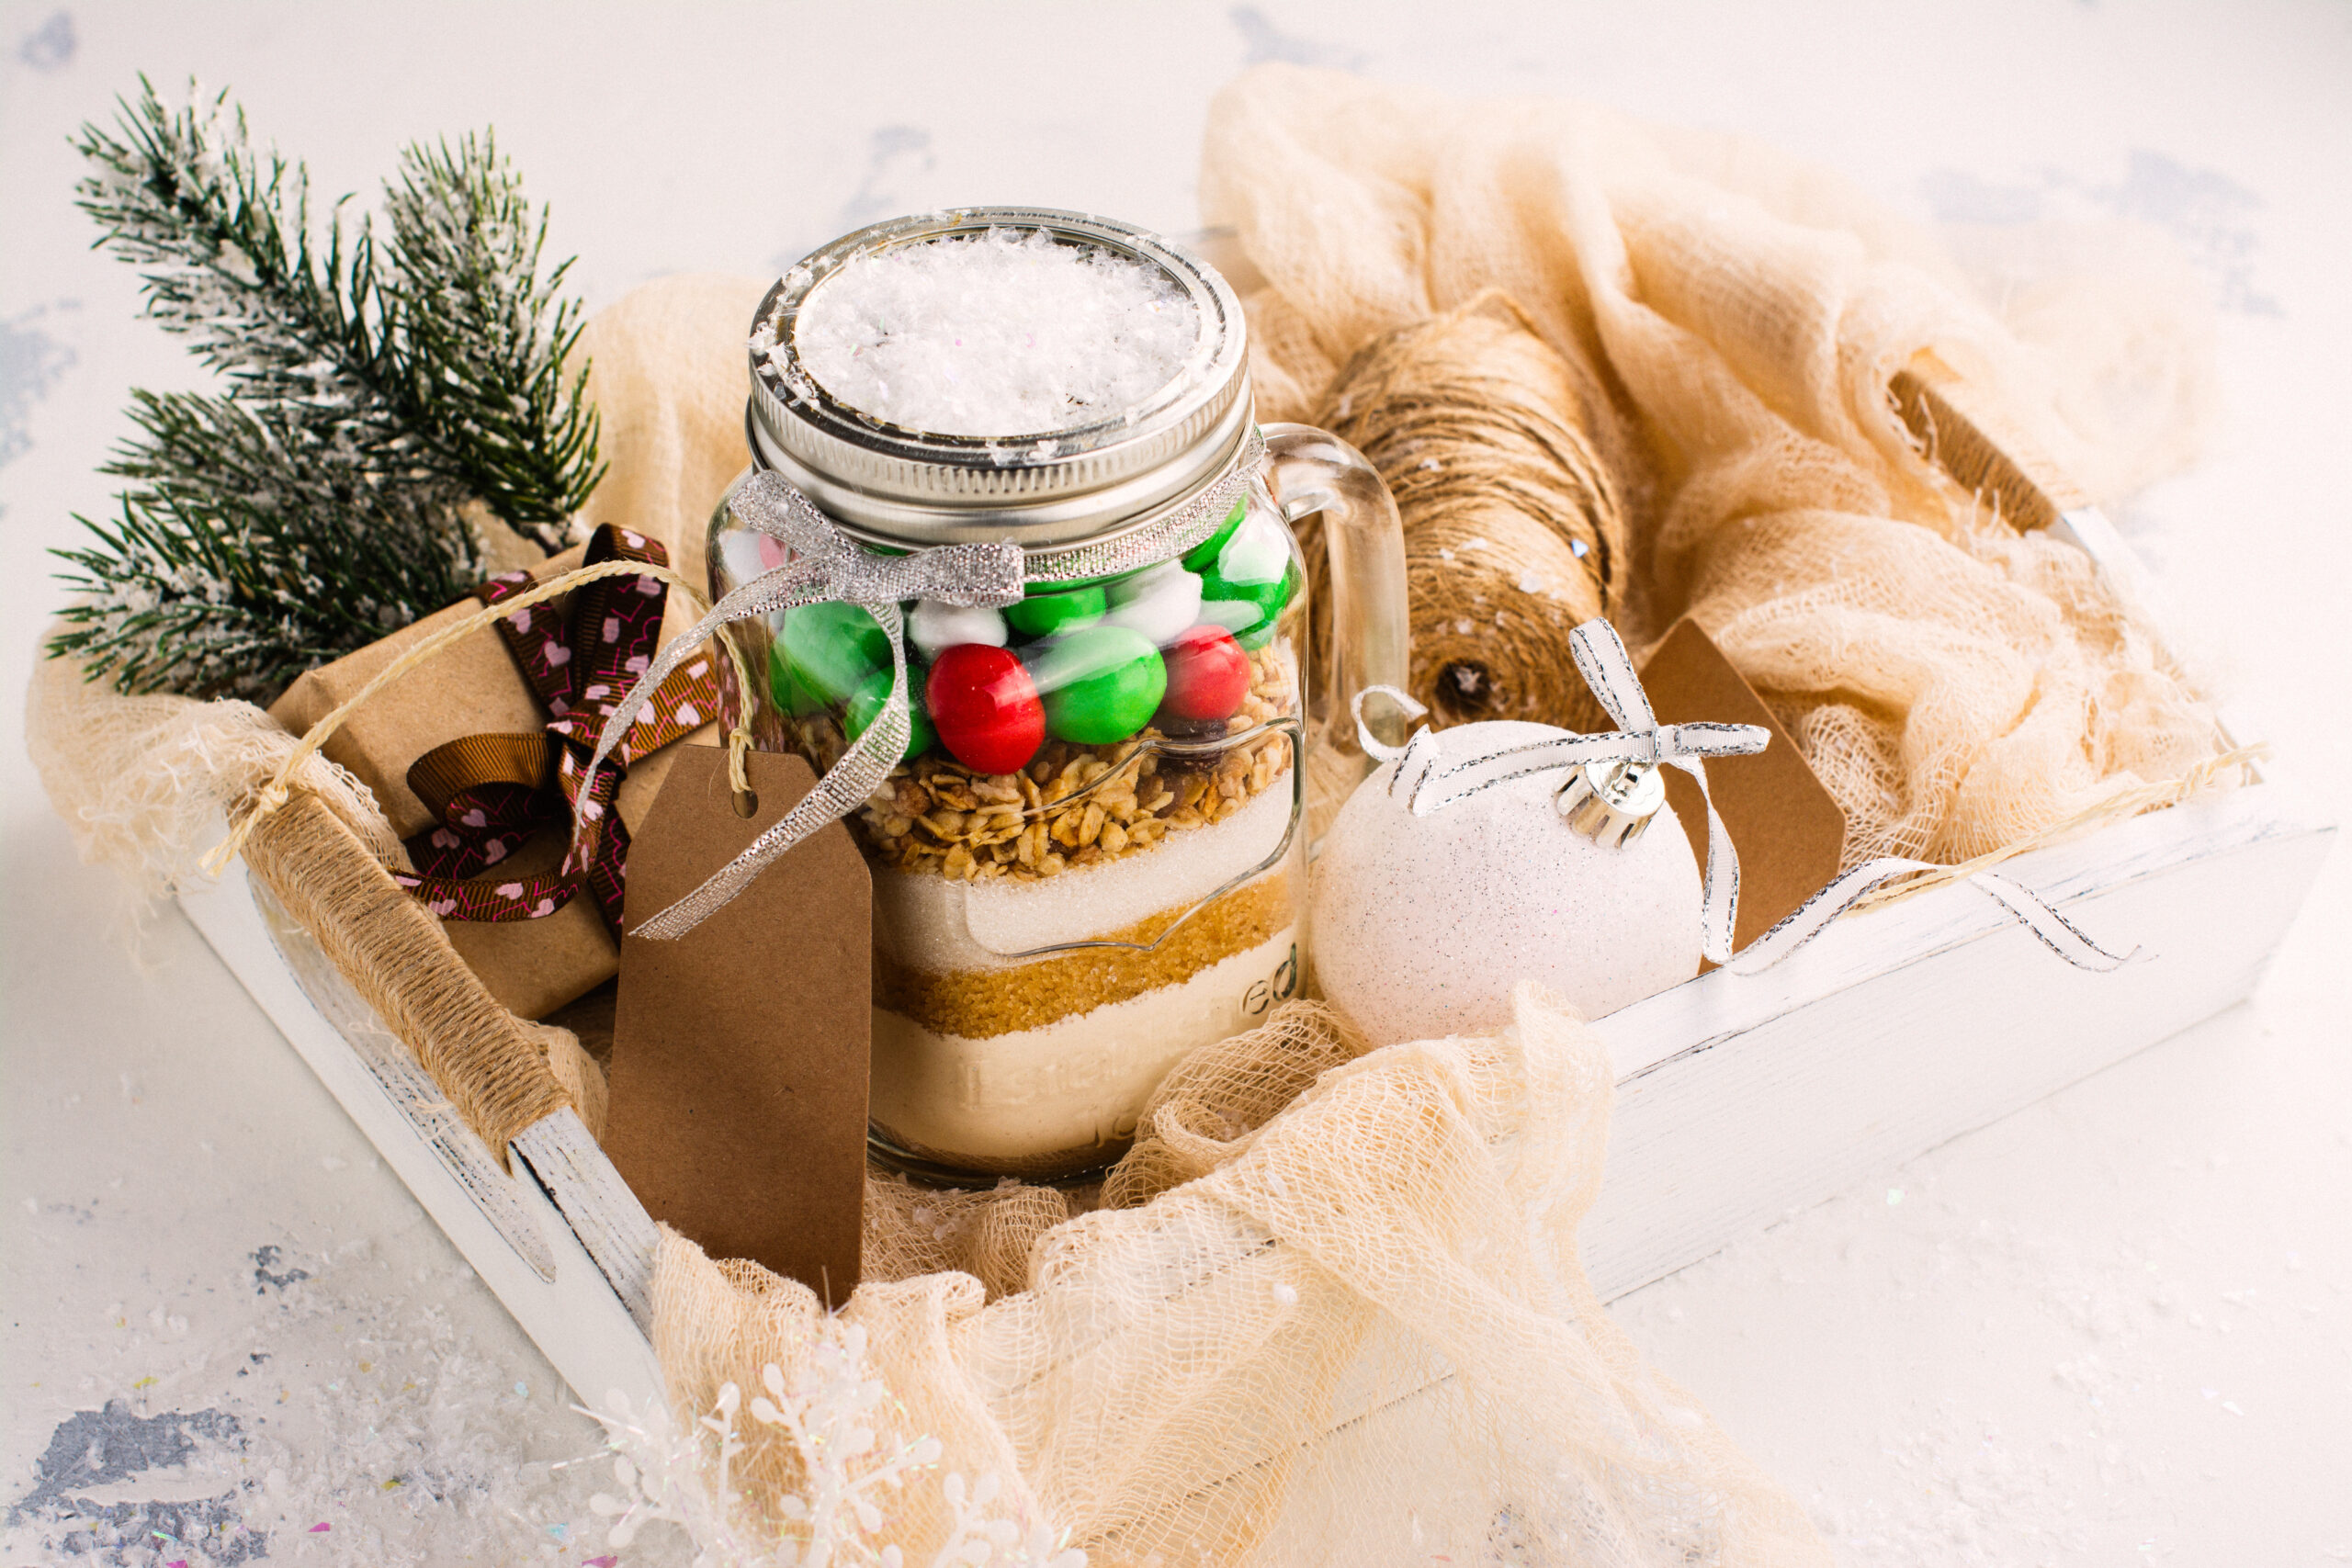 Homemade gift idea; cookie mix in a jar! A mason jar filled with pre-measured dry ingredients for delicious and festive Christmas cookies! Cookies mix with color candies in a jar. Handmade Christmas gift.  Great gift or stocking stuffer!